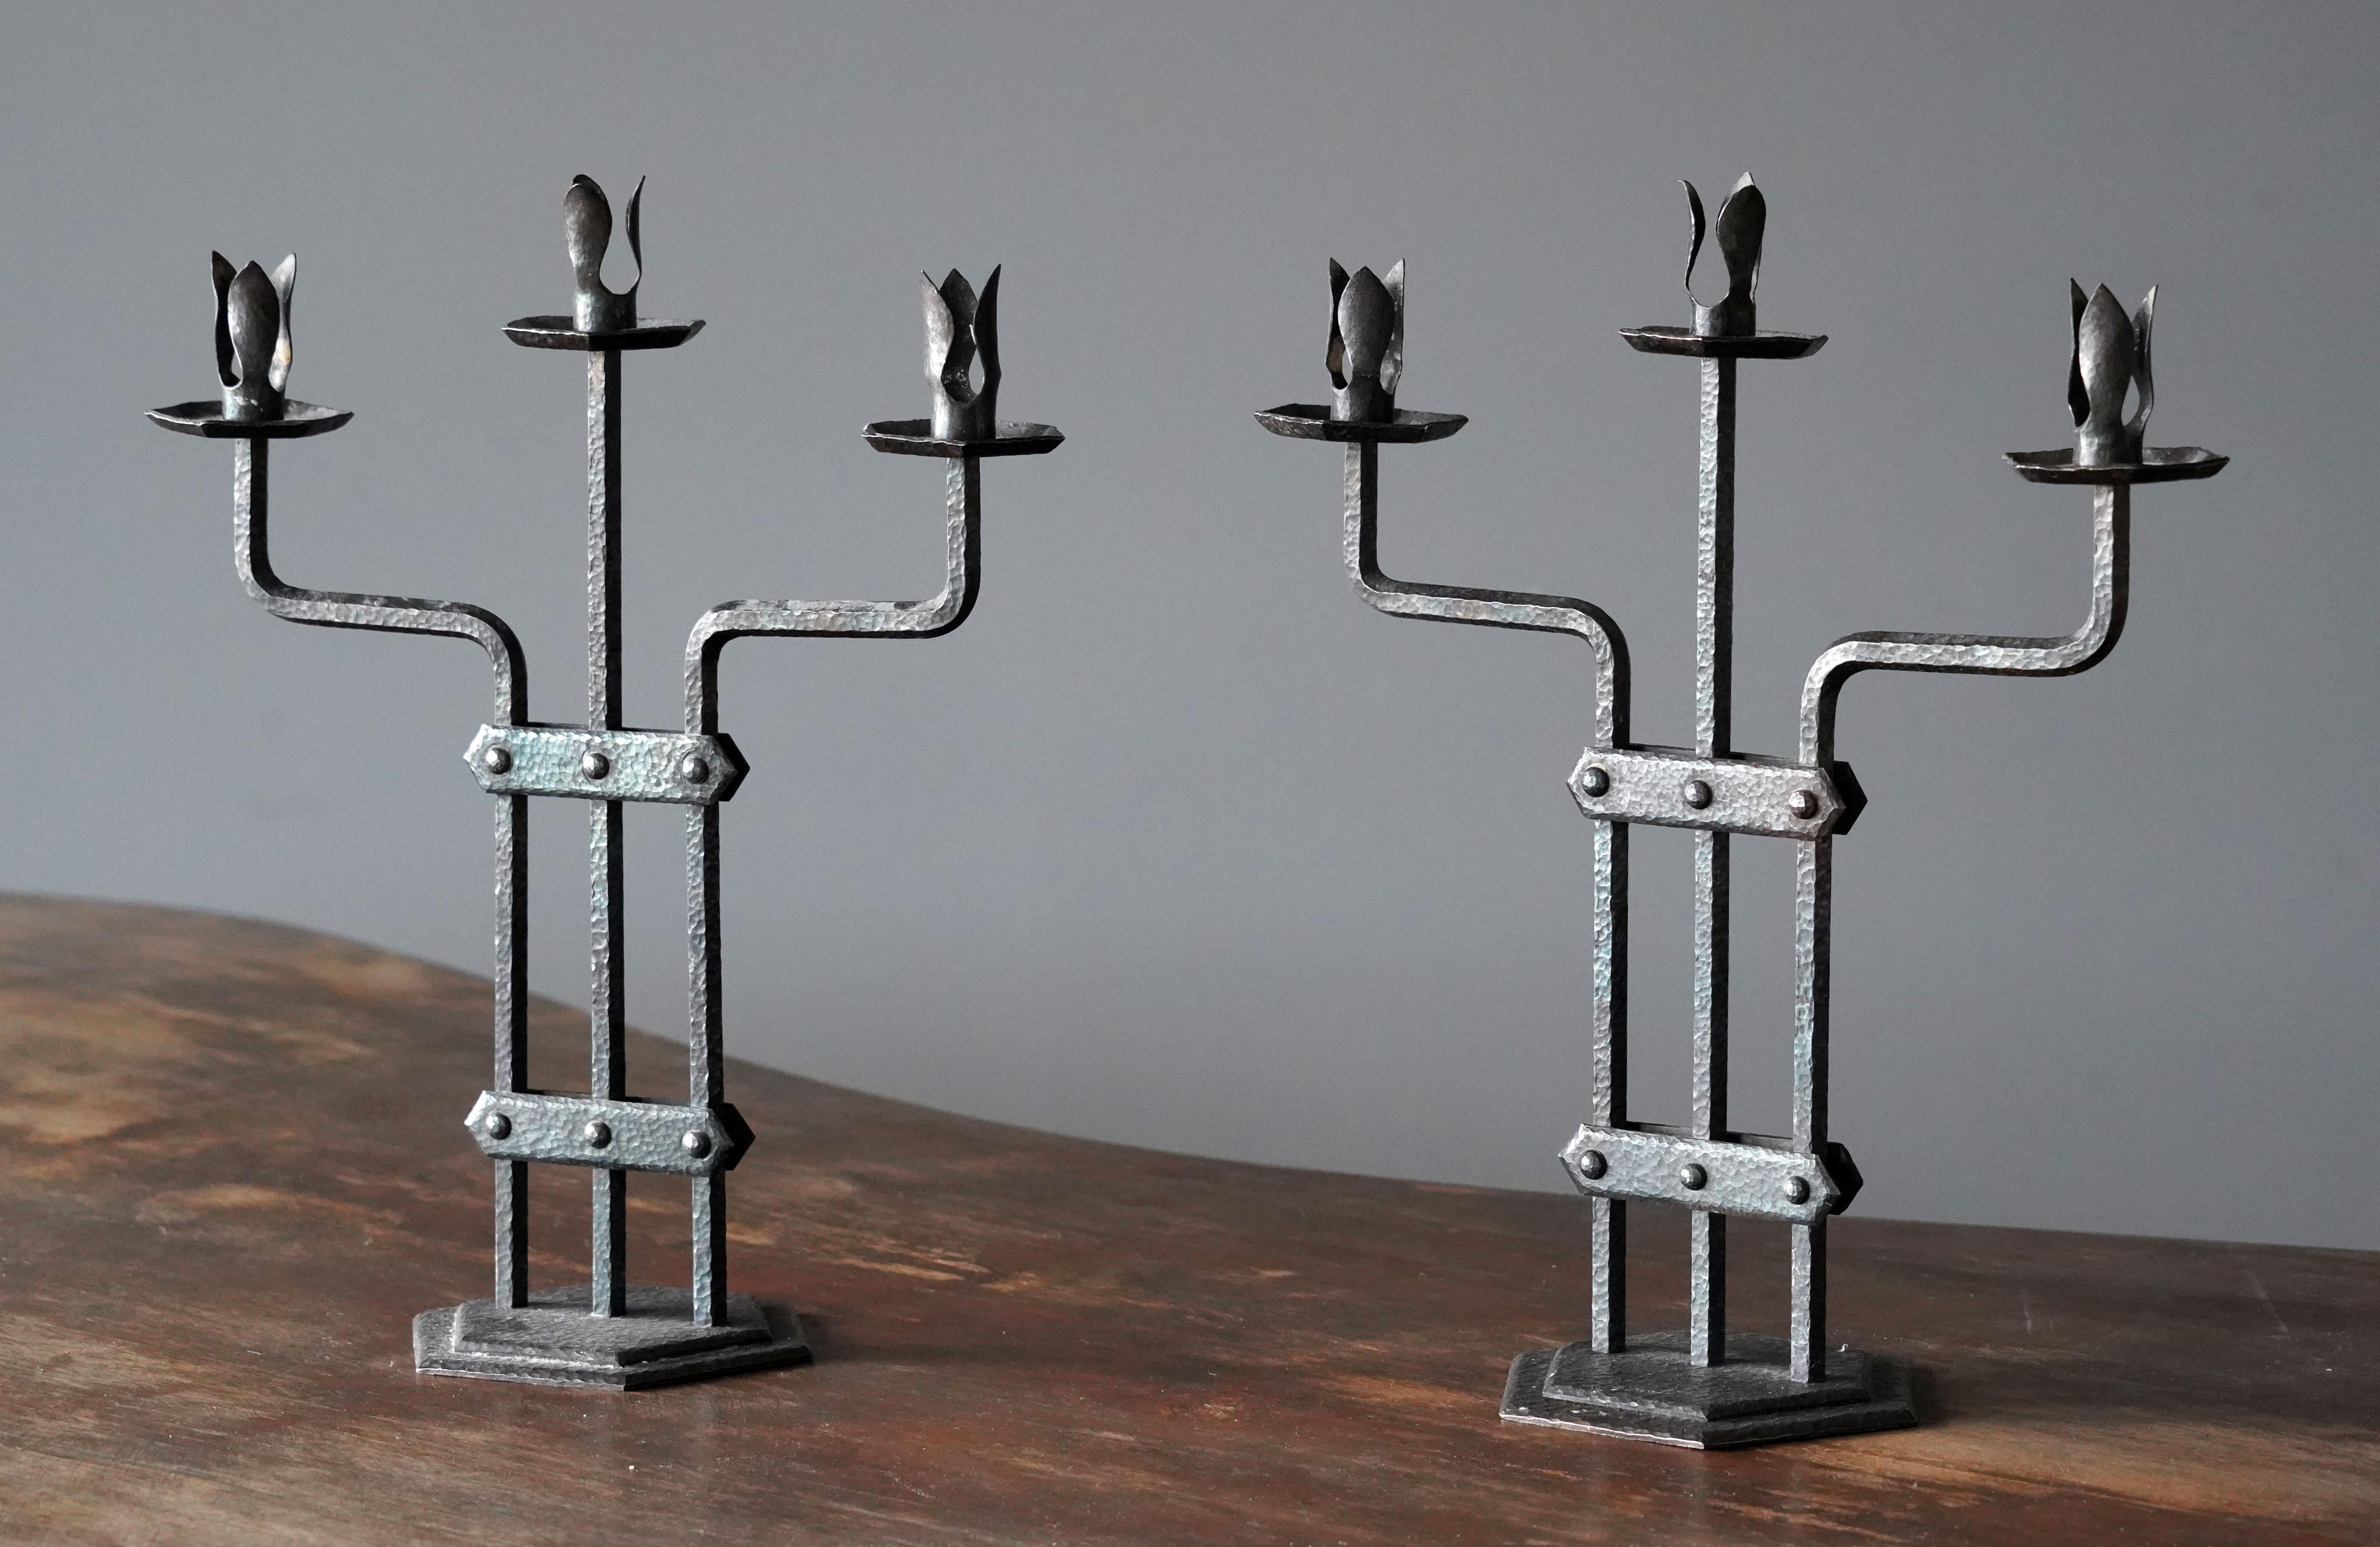 A pair of sculptural handcrafted candelabra

Produced in Sweden, circa 1940s.

Other designers of the period include Diego Giacometti, Lars Holmström, Josef Frank, Folke Bensow, and Isamu Noguchi.